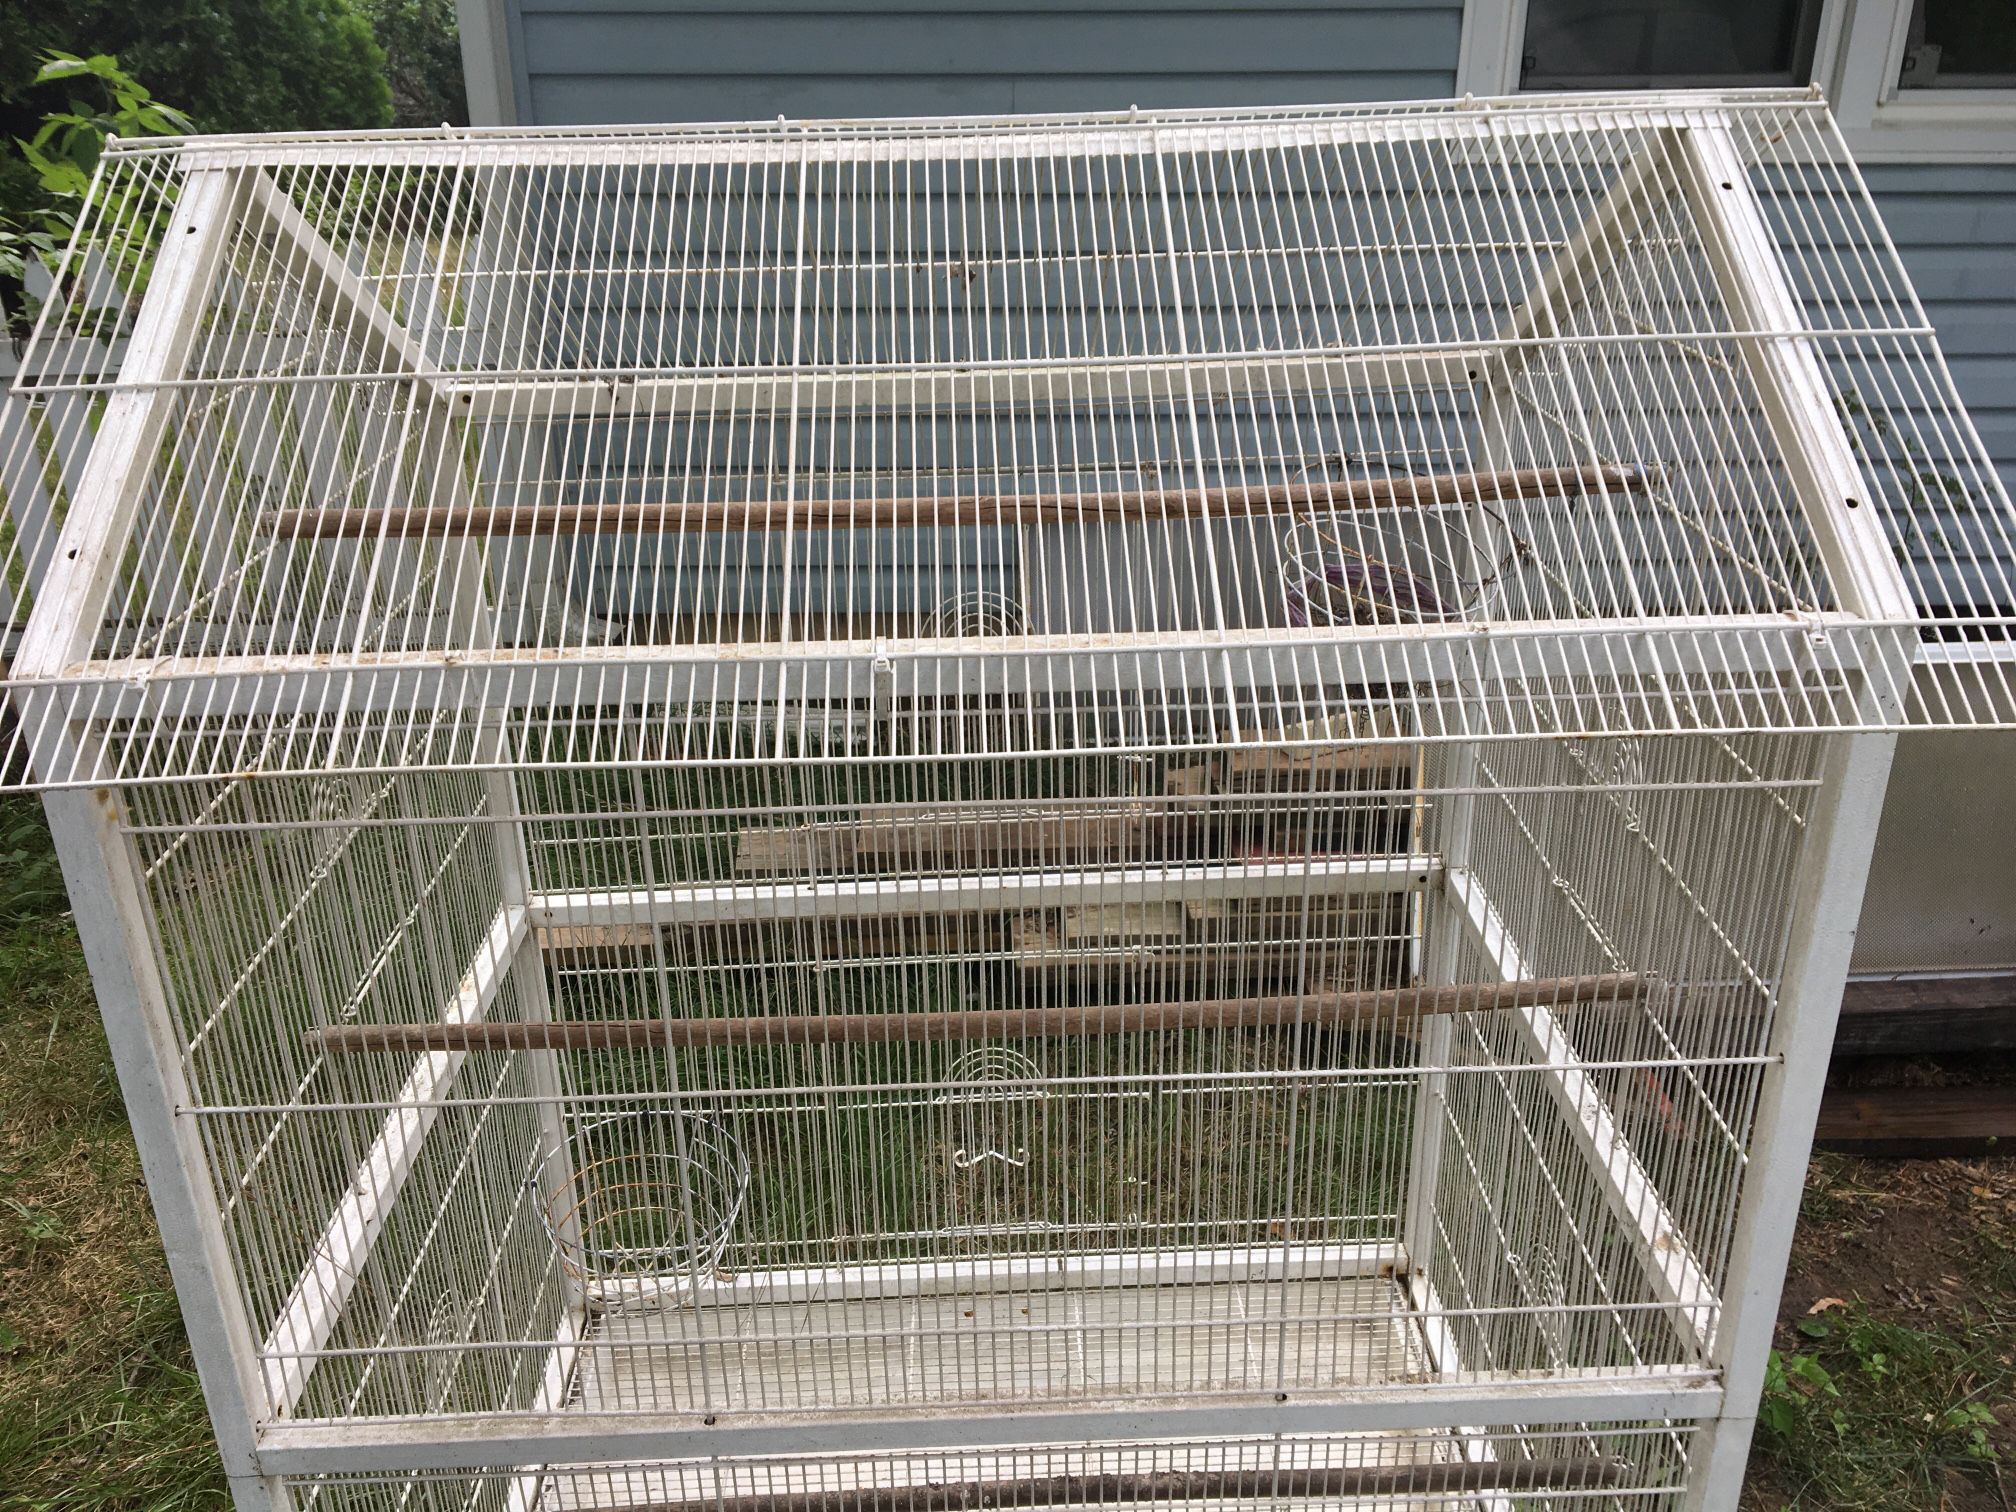 Aviary (bird Cage) Disassembled For Pickup